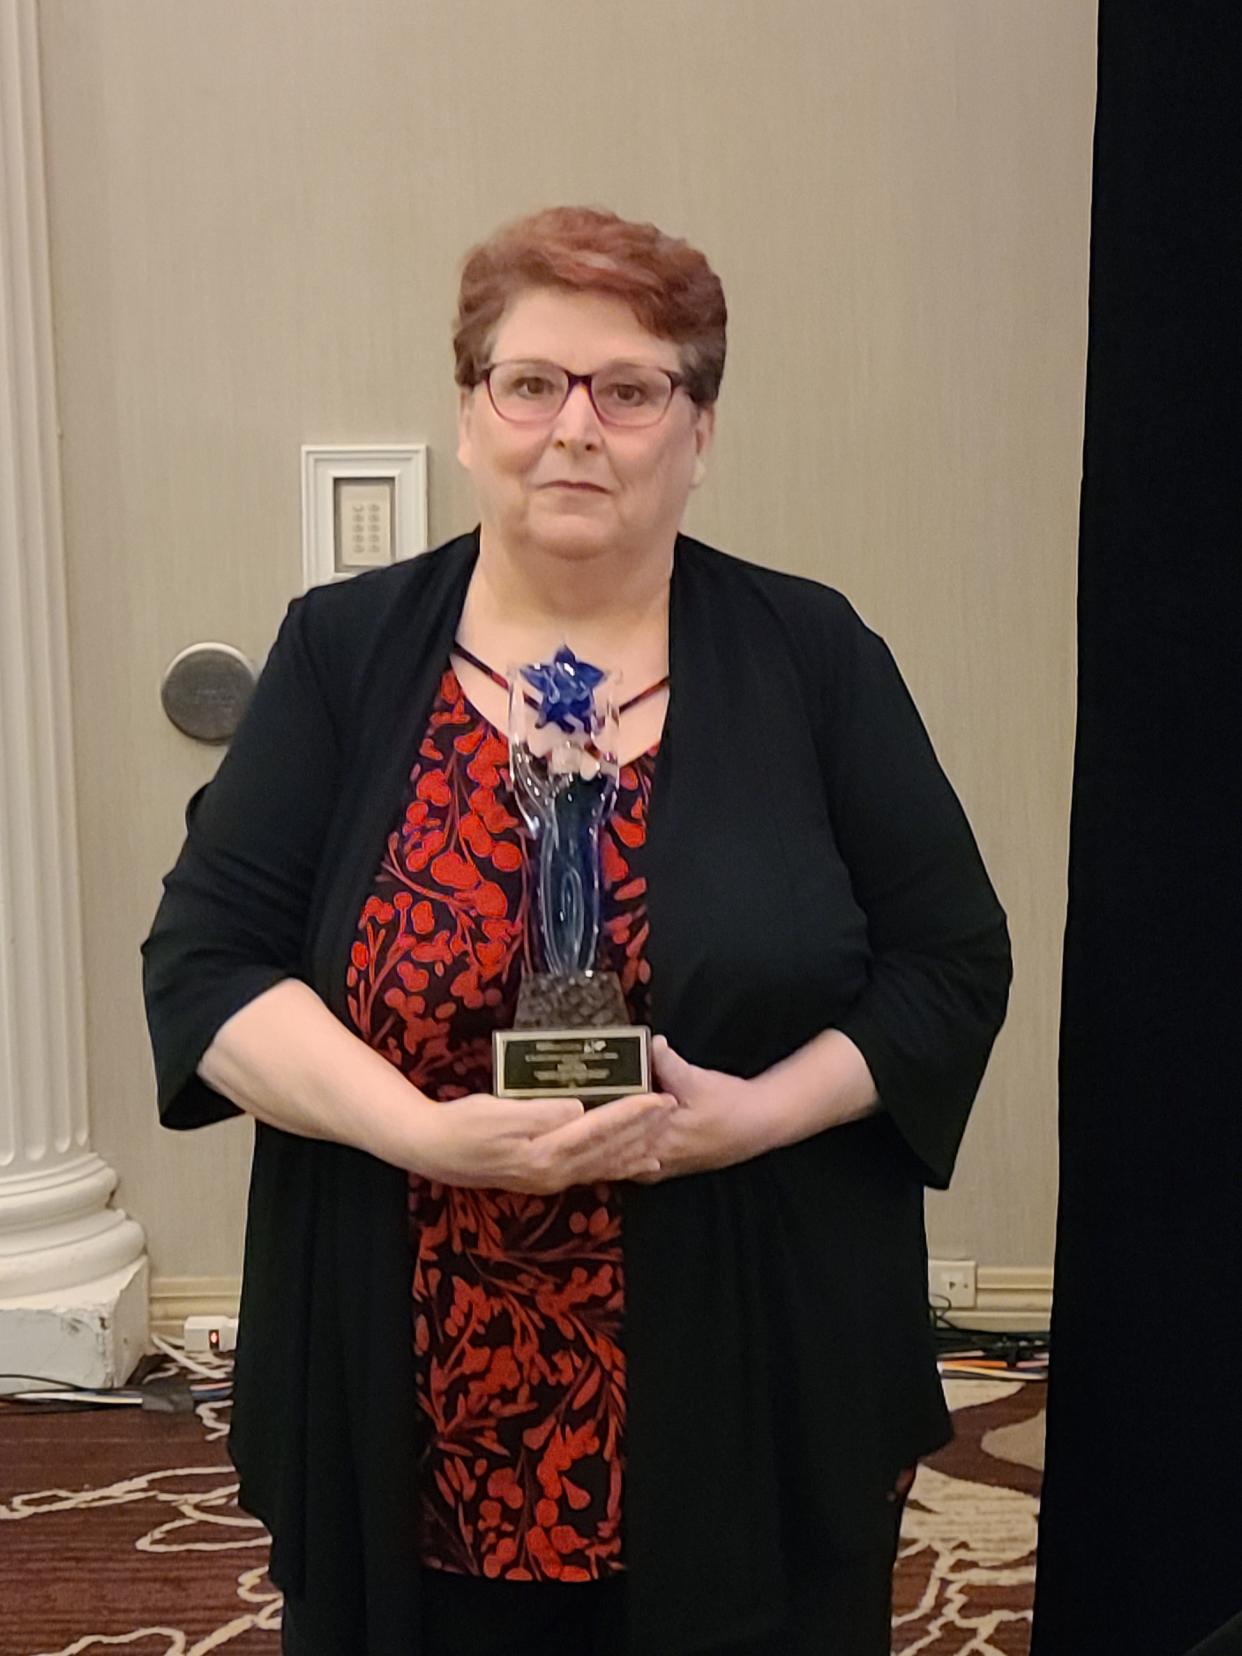 Versel Rush, a regional attorney for Child Protective Services, was honored recently in Houston with the Rutland Excellence in Advocacy Award from the State Bar of Texas Child Abuse and Neglect Committee.